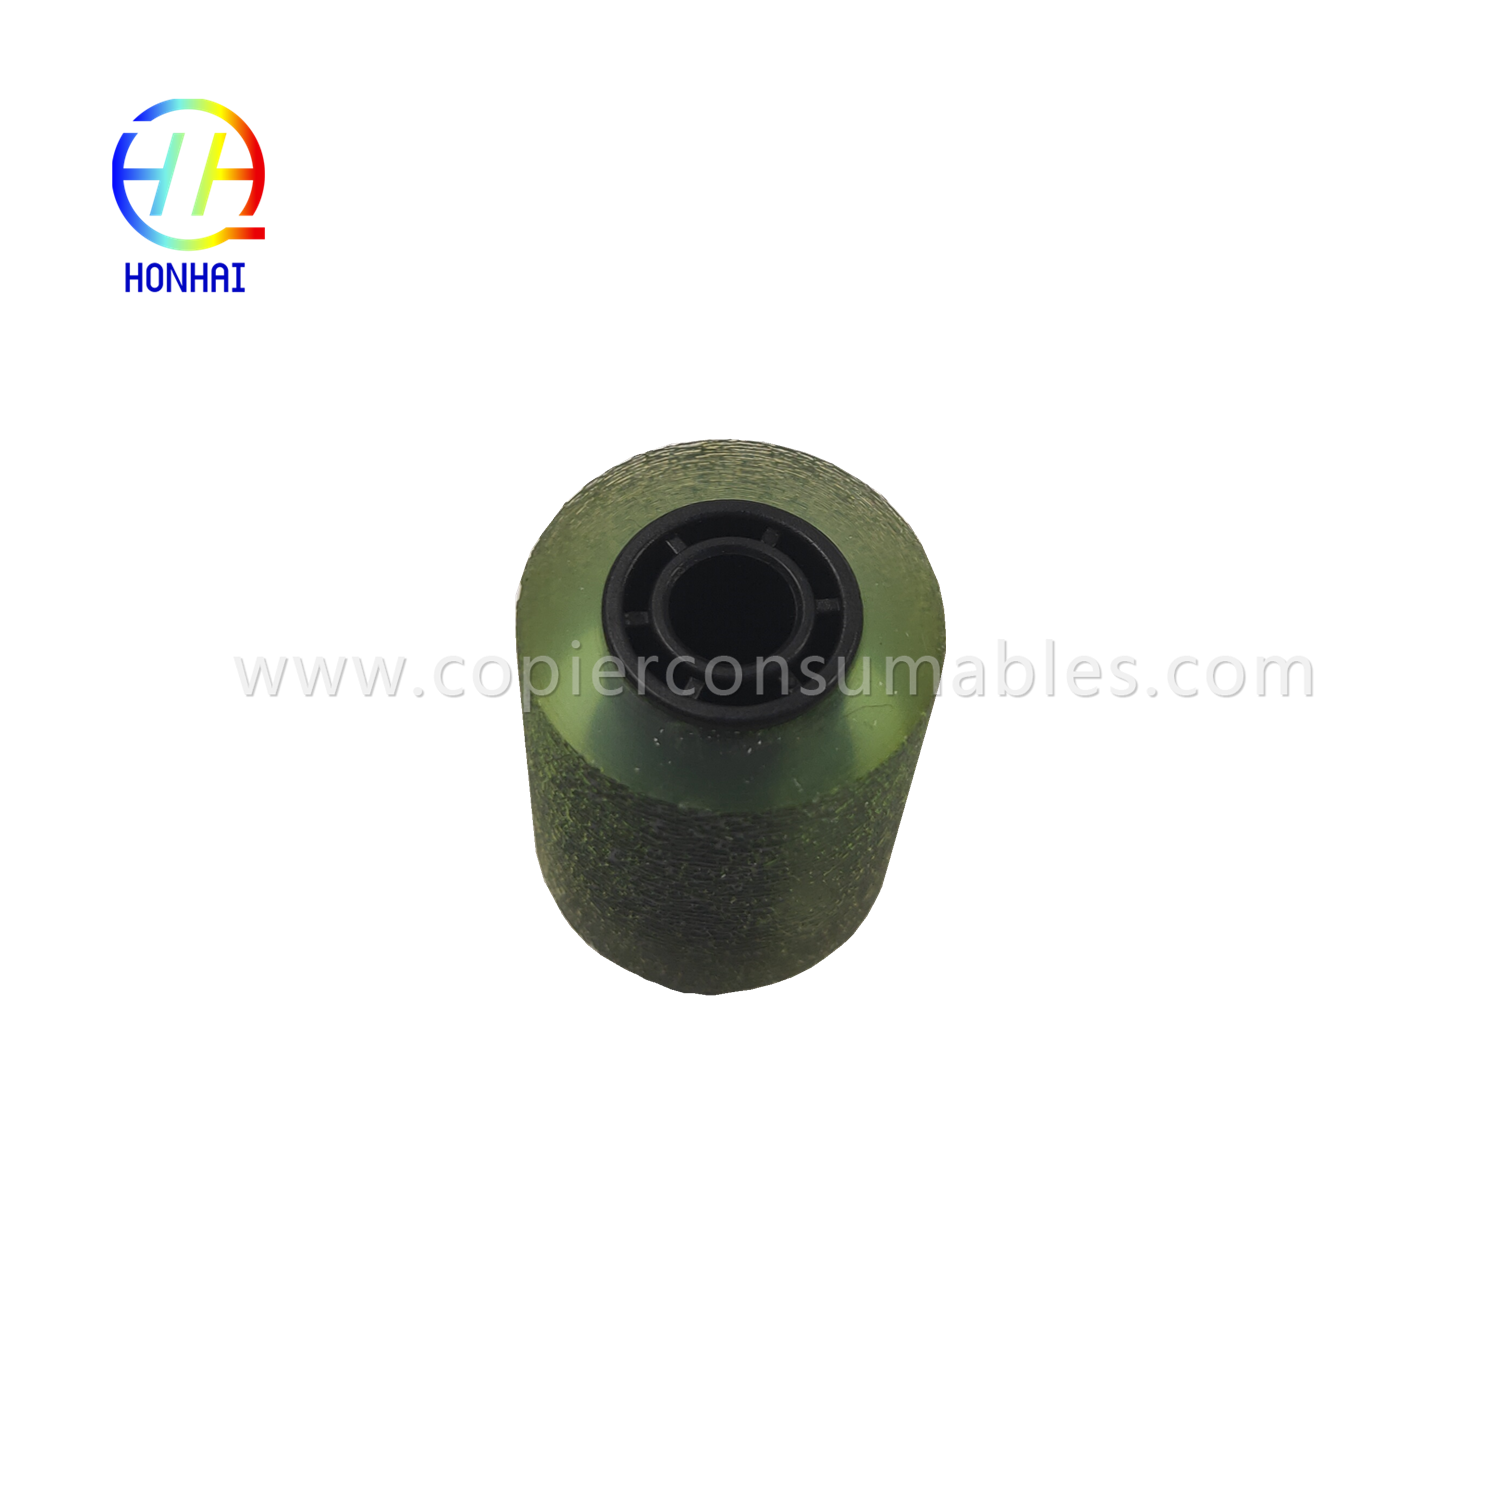 https://c585.goodo.net/feed-roller-for-ricoh-mpc2003-mpc2503-mpc3003-mpc3503-af031094-ፊድ-መለያየት-ሮለር-ምርት/